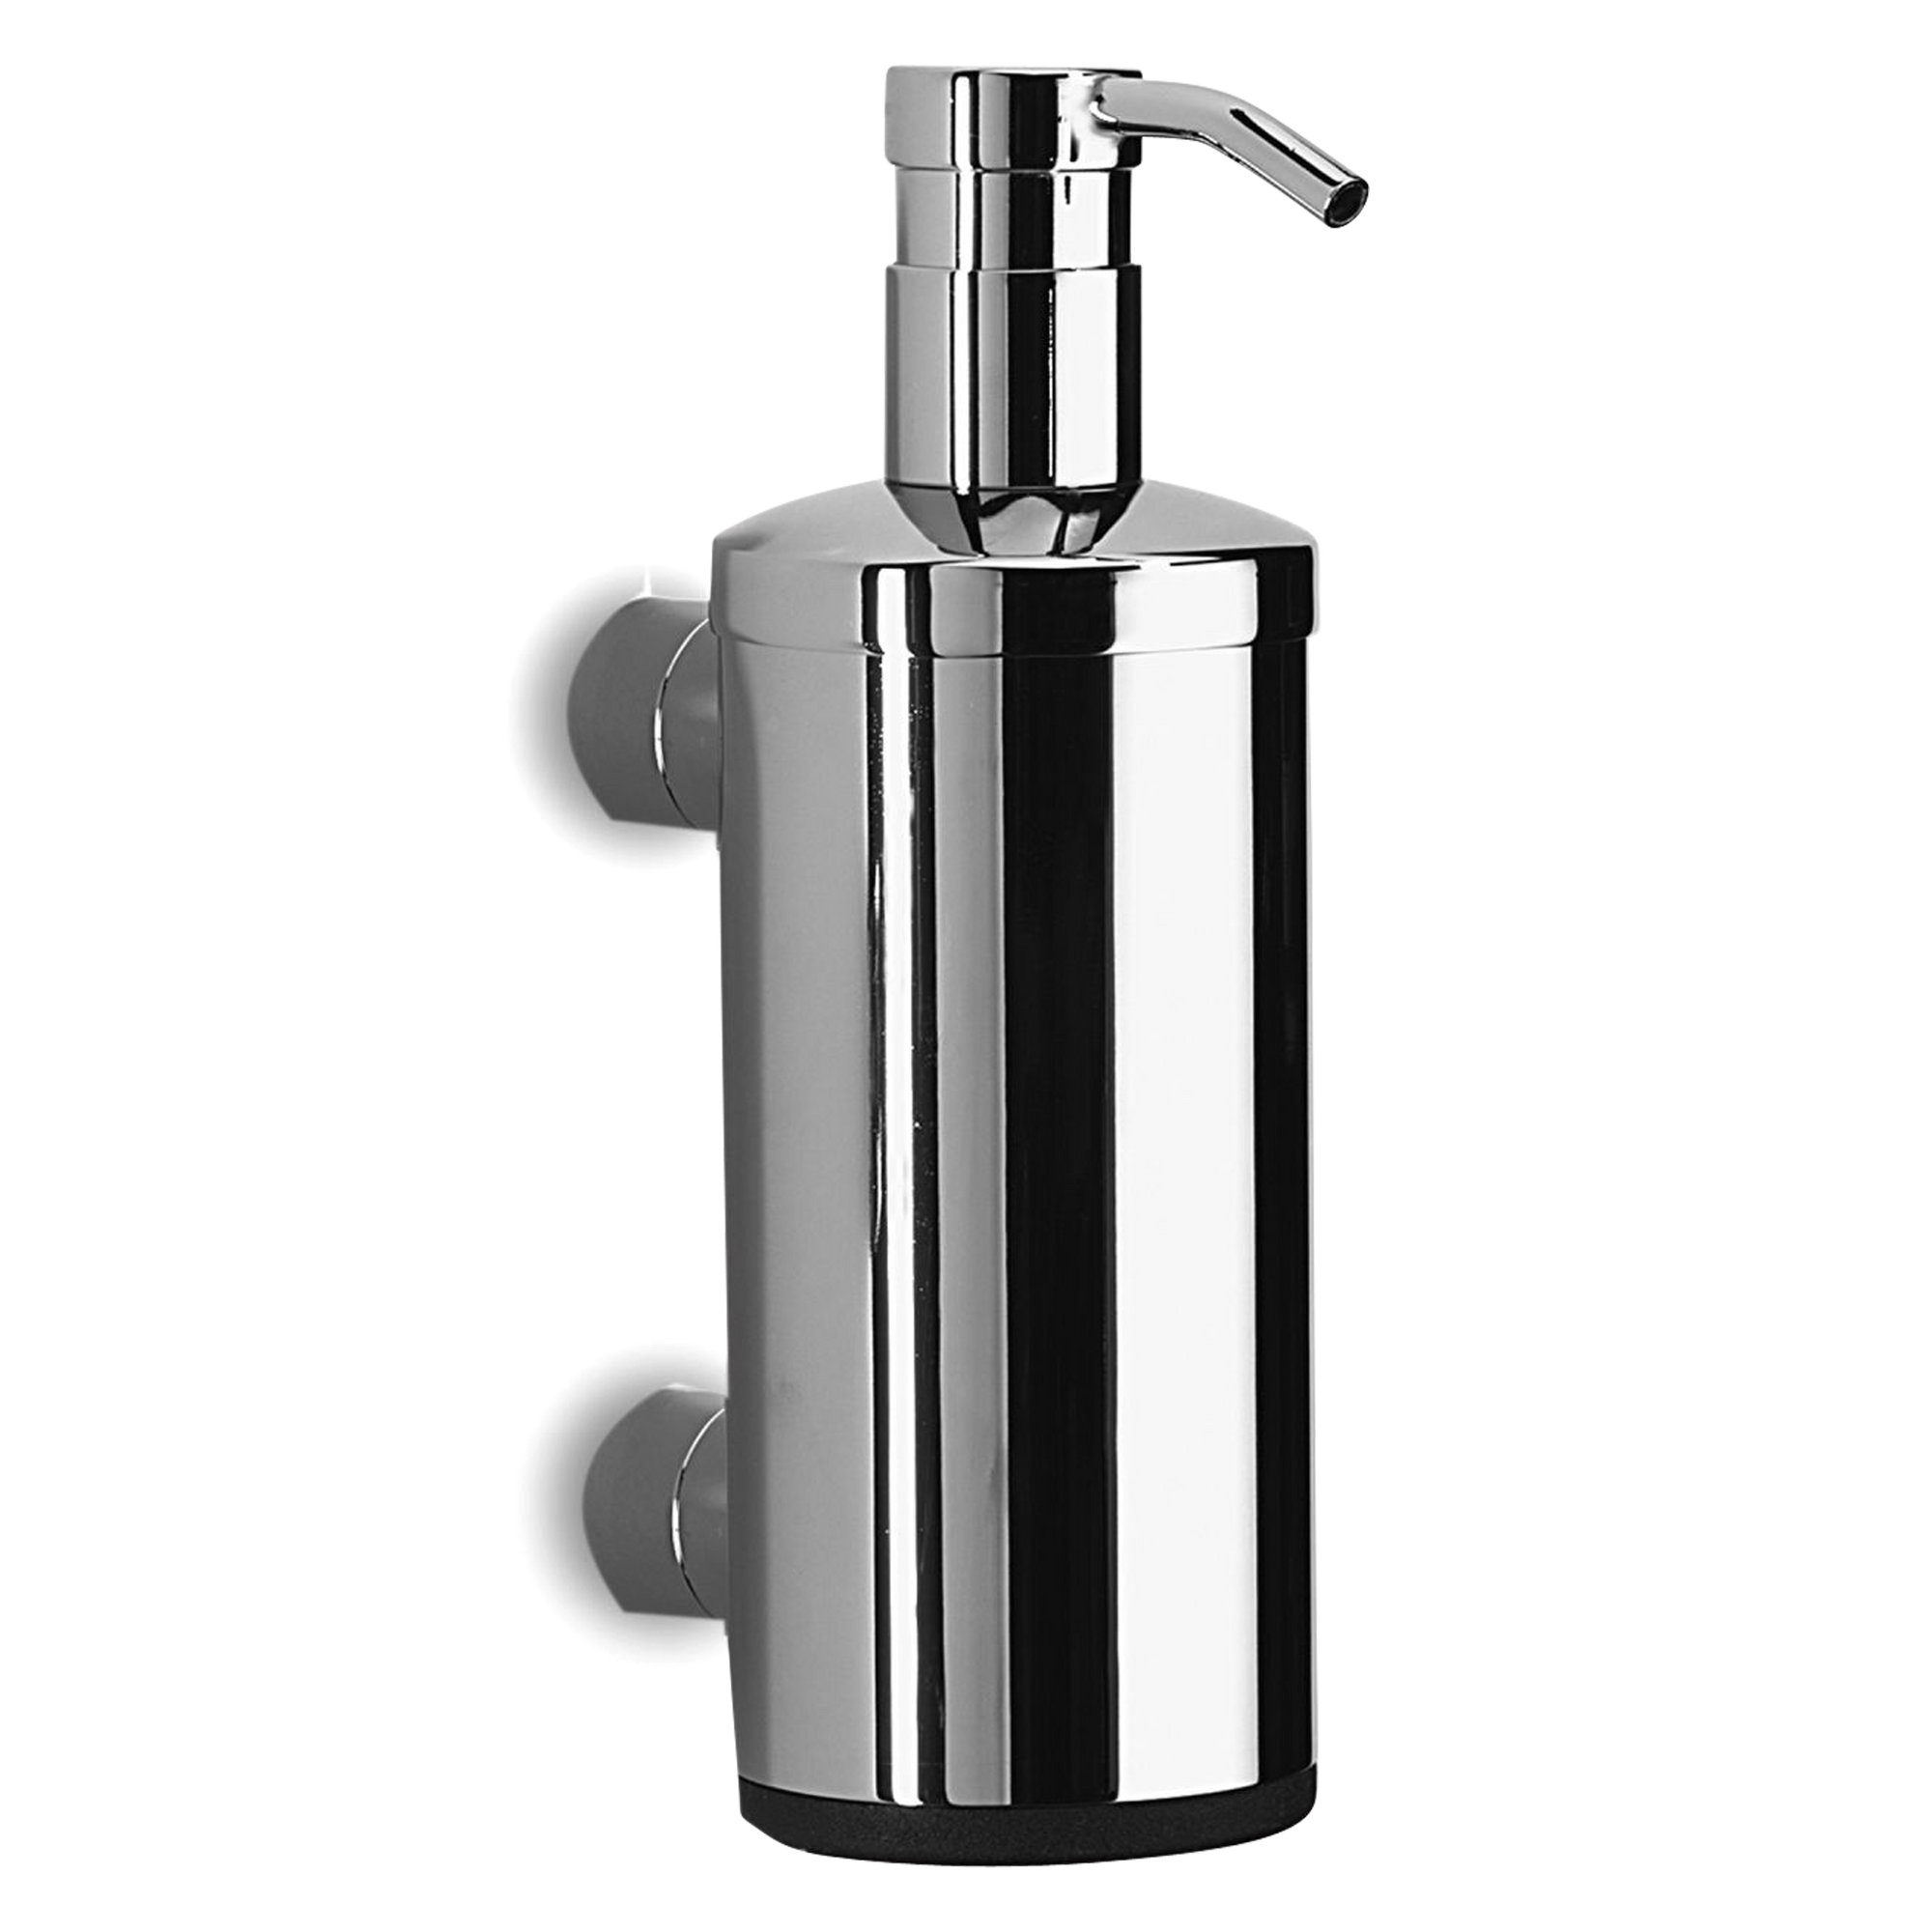 Minimalist and modern, the functional wall-mounted Xenon Soap Dispenser features a top push down mechanism.